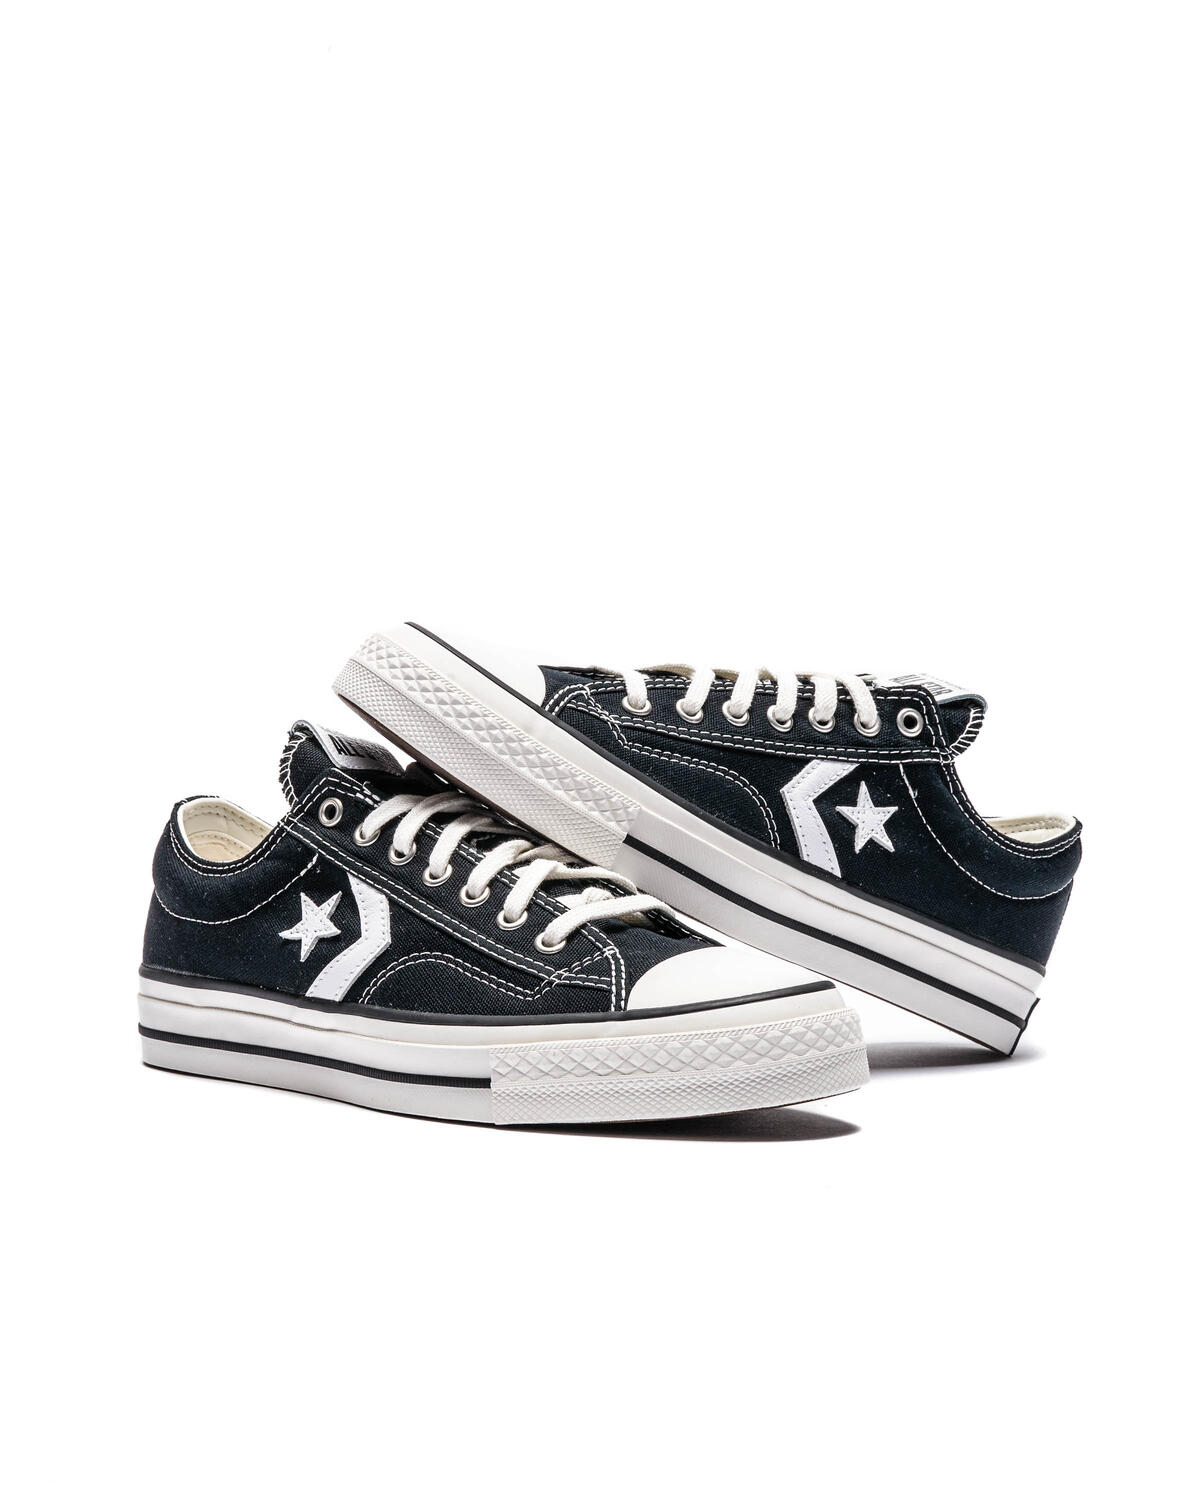 Microbio Marchitar esquina Converse STAR PLAYER 76 OX | A01607C | AFEW STORE